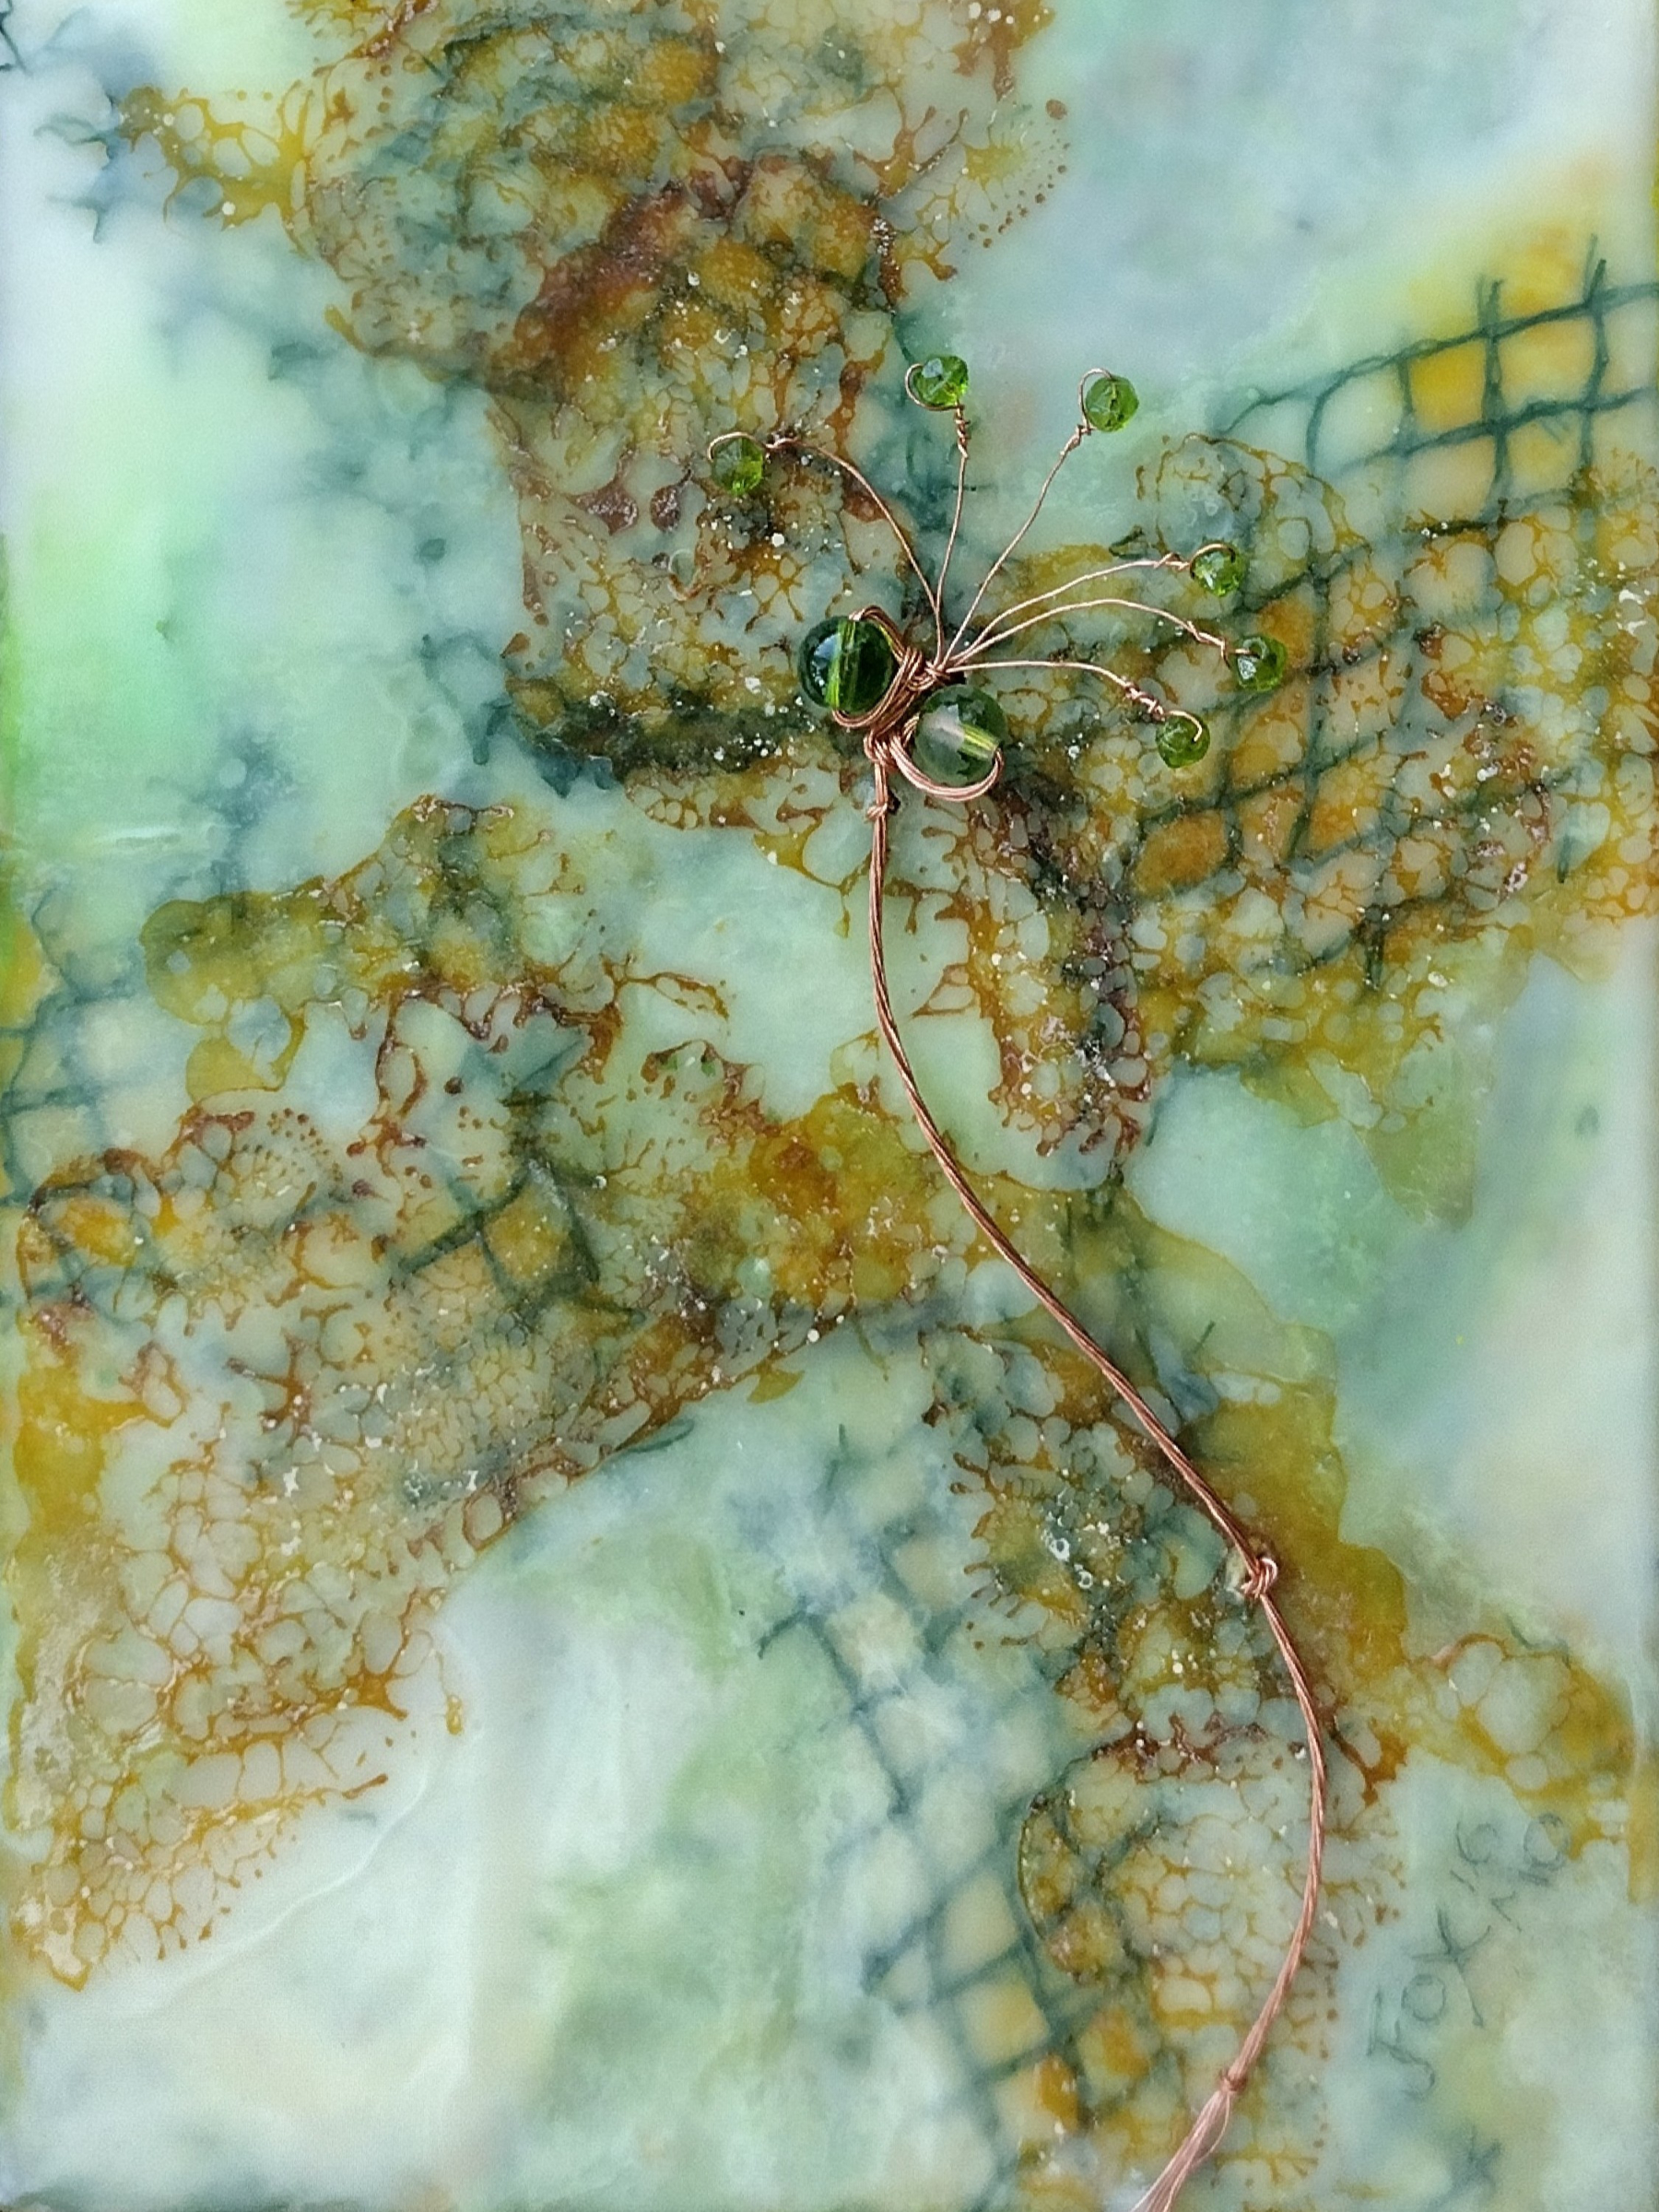 encaustic mixed media painting with copper and green beads by Janet Fox